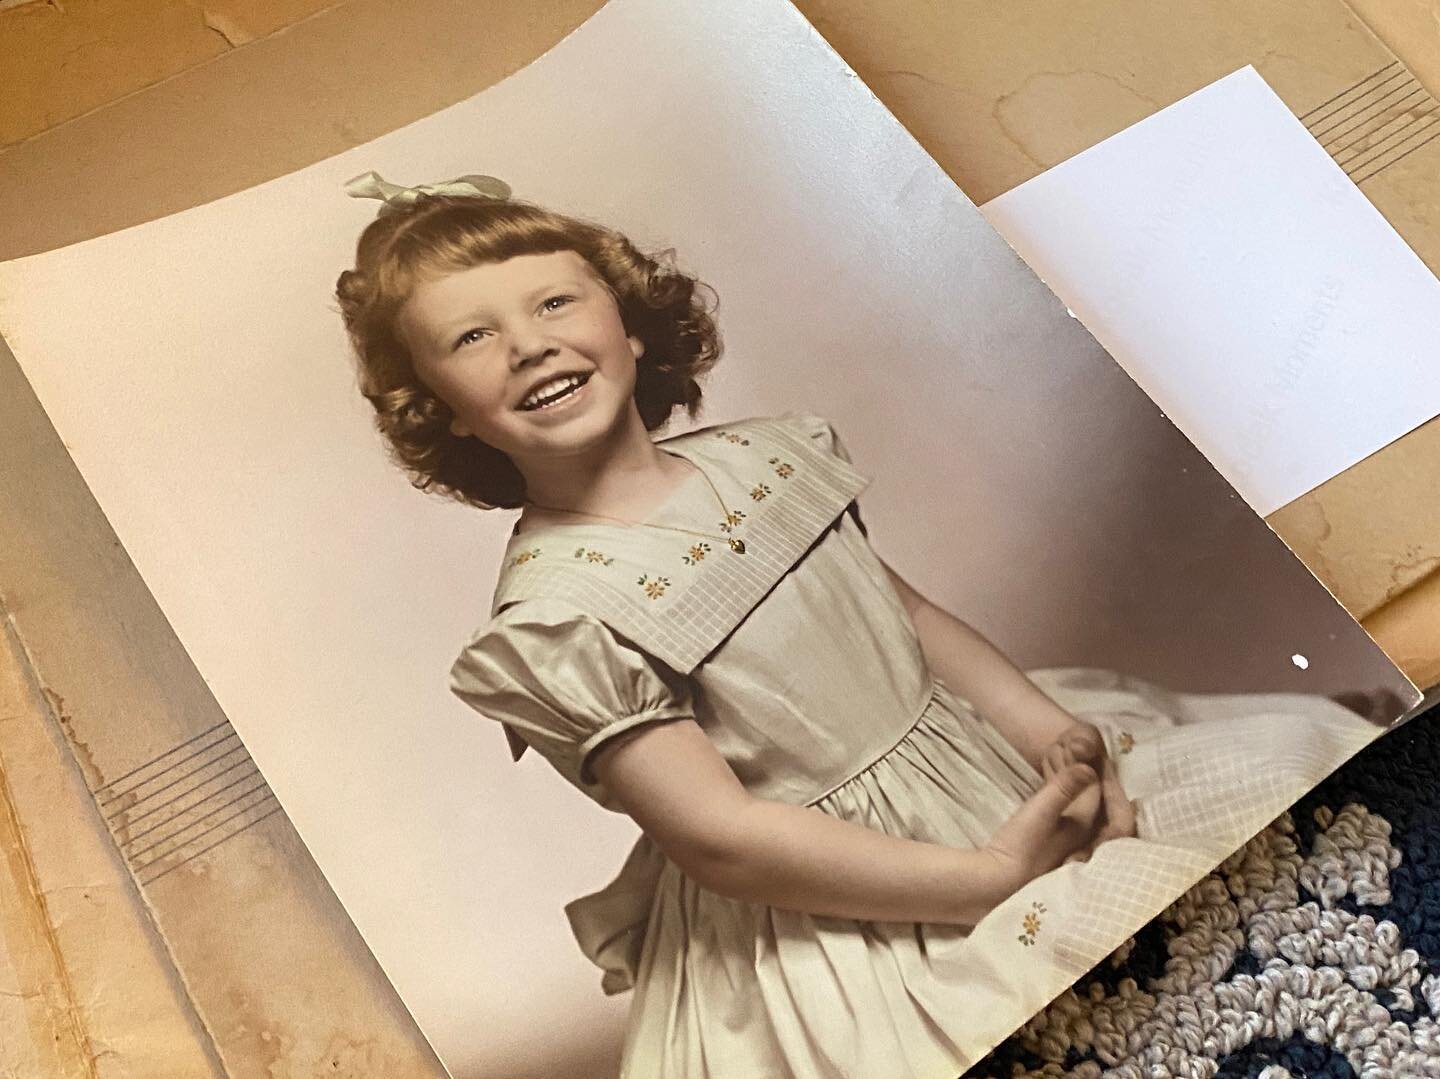 A cherished Gelatin Silver Fiber hand-colored photo of a client&rsquo;s mother who passed away suddenly was recently entrusted to me. 😢 We are helping digitize and preserve this beautiful photo. 

My side-hustle Signature Photo Organizing, has an op